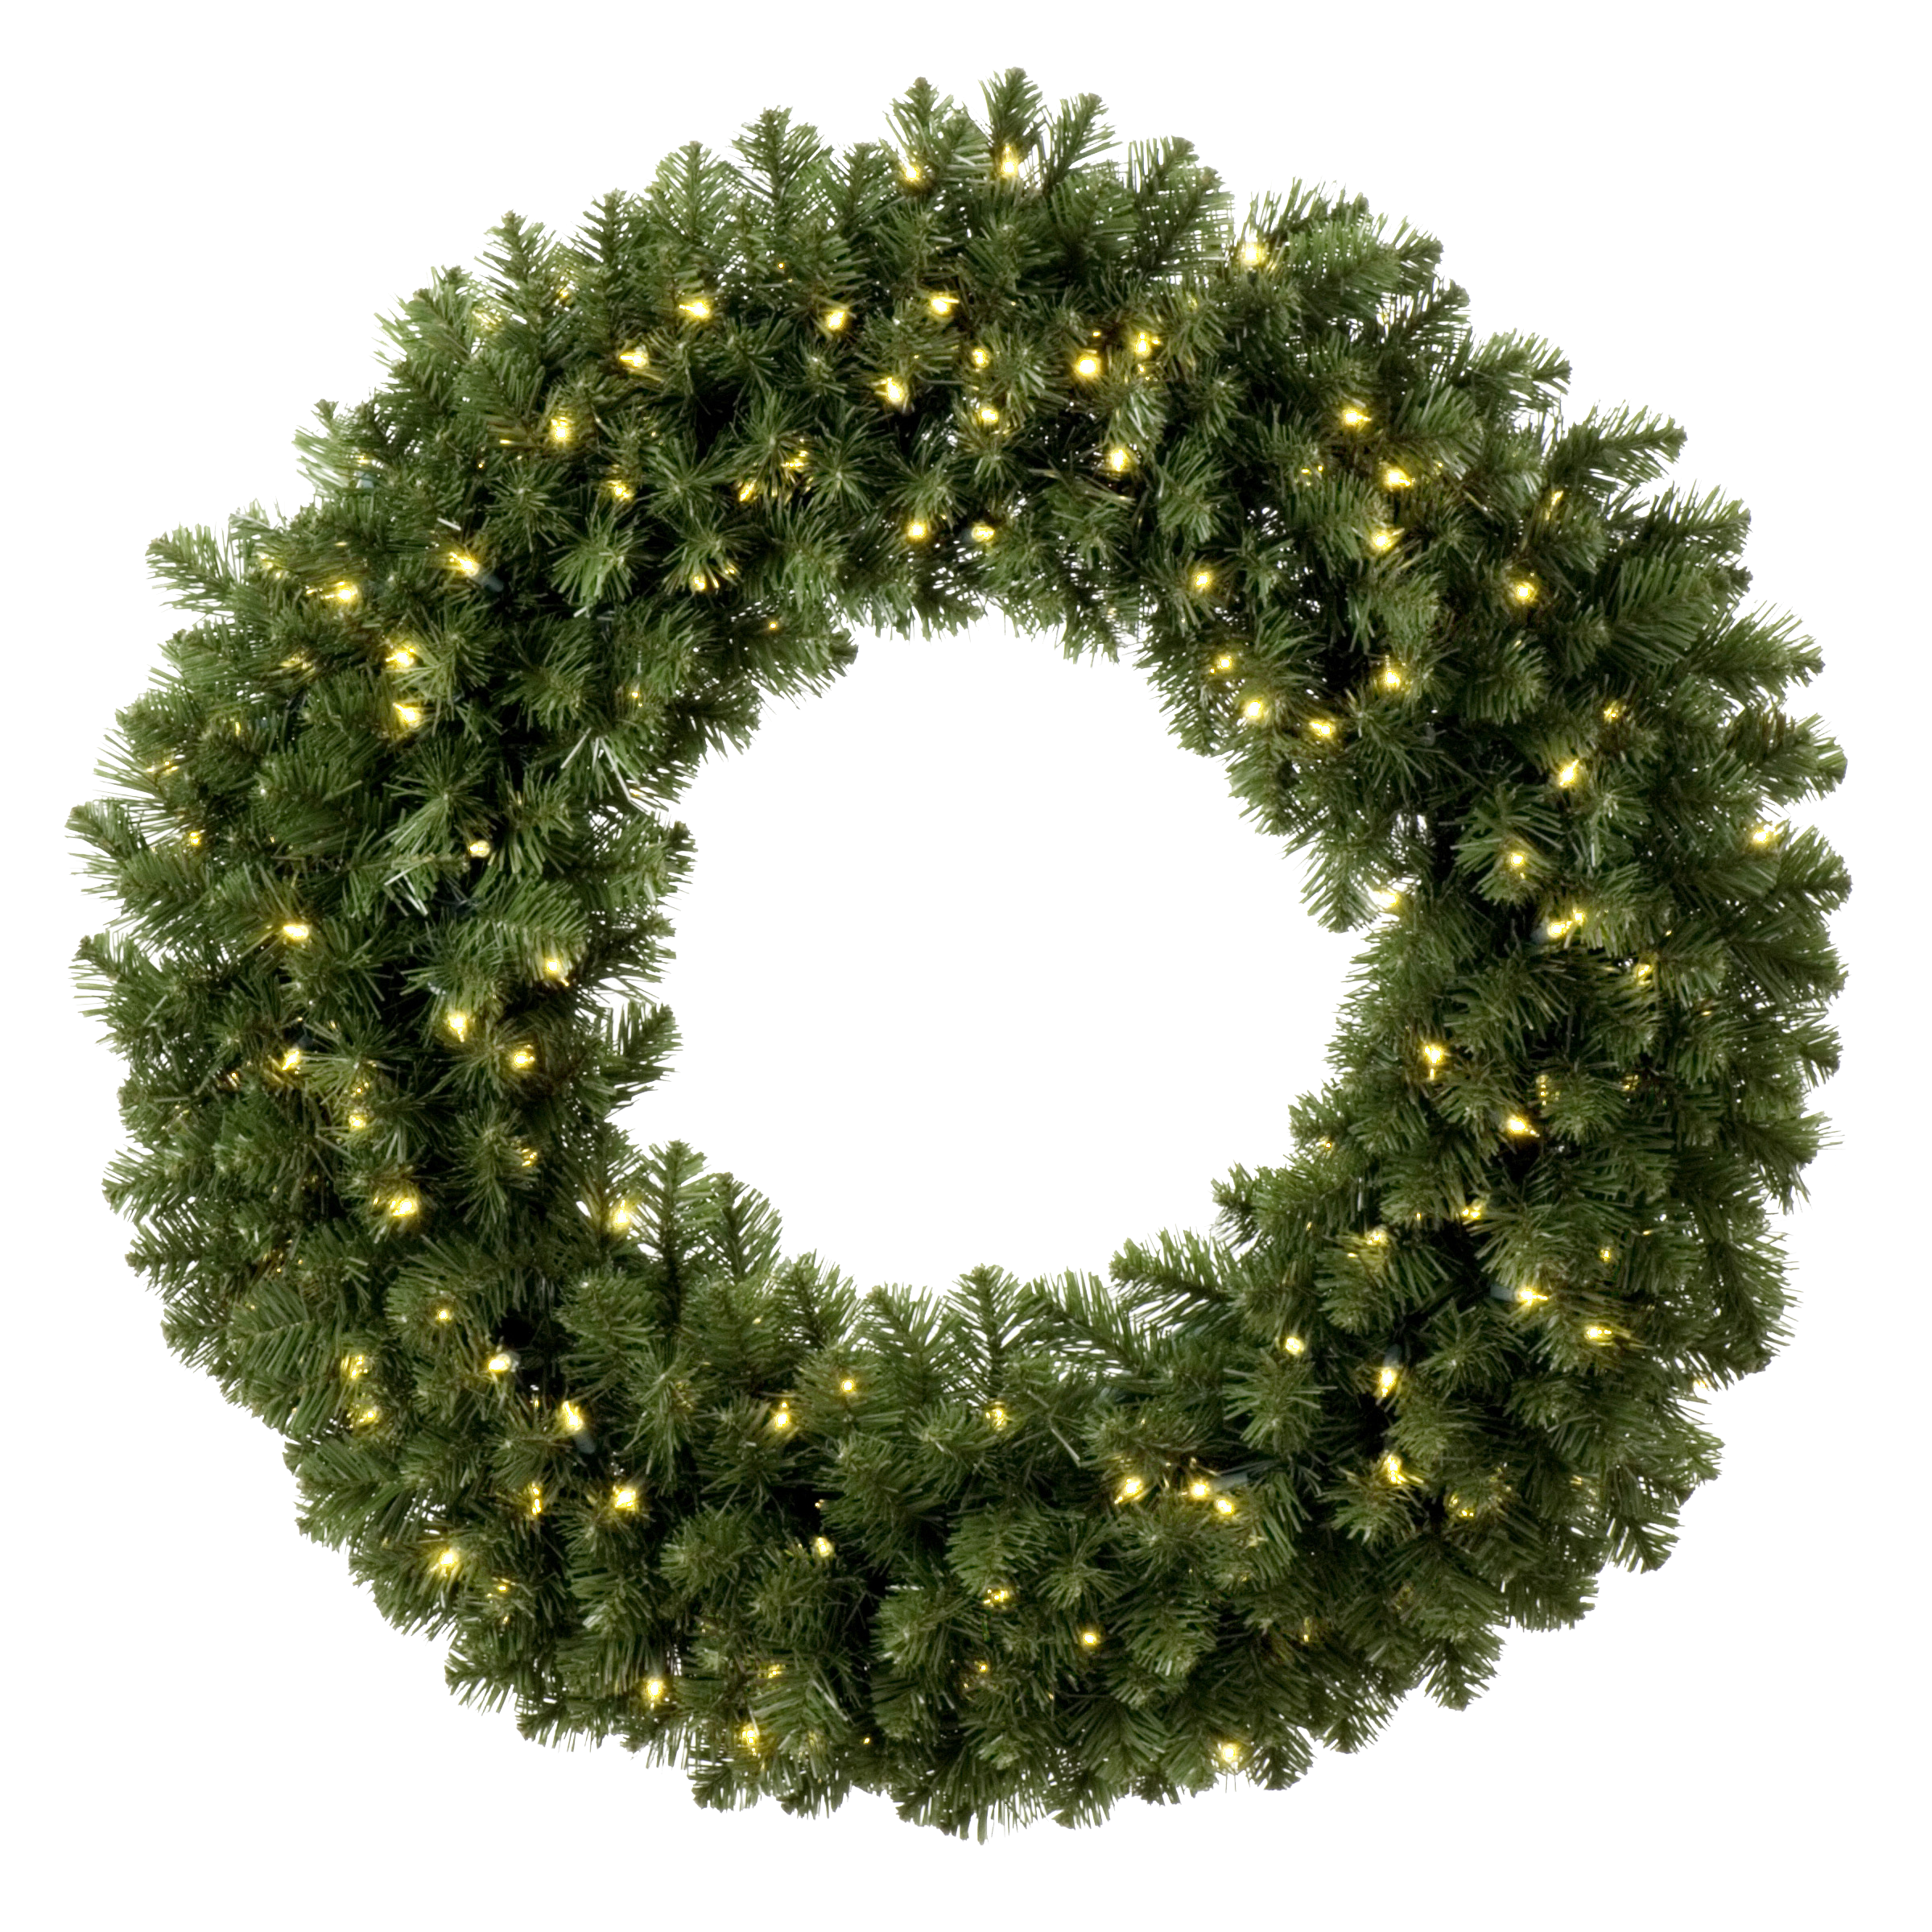 Download PNG image - Christmas Wreath PNG Photo 